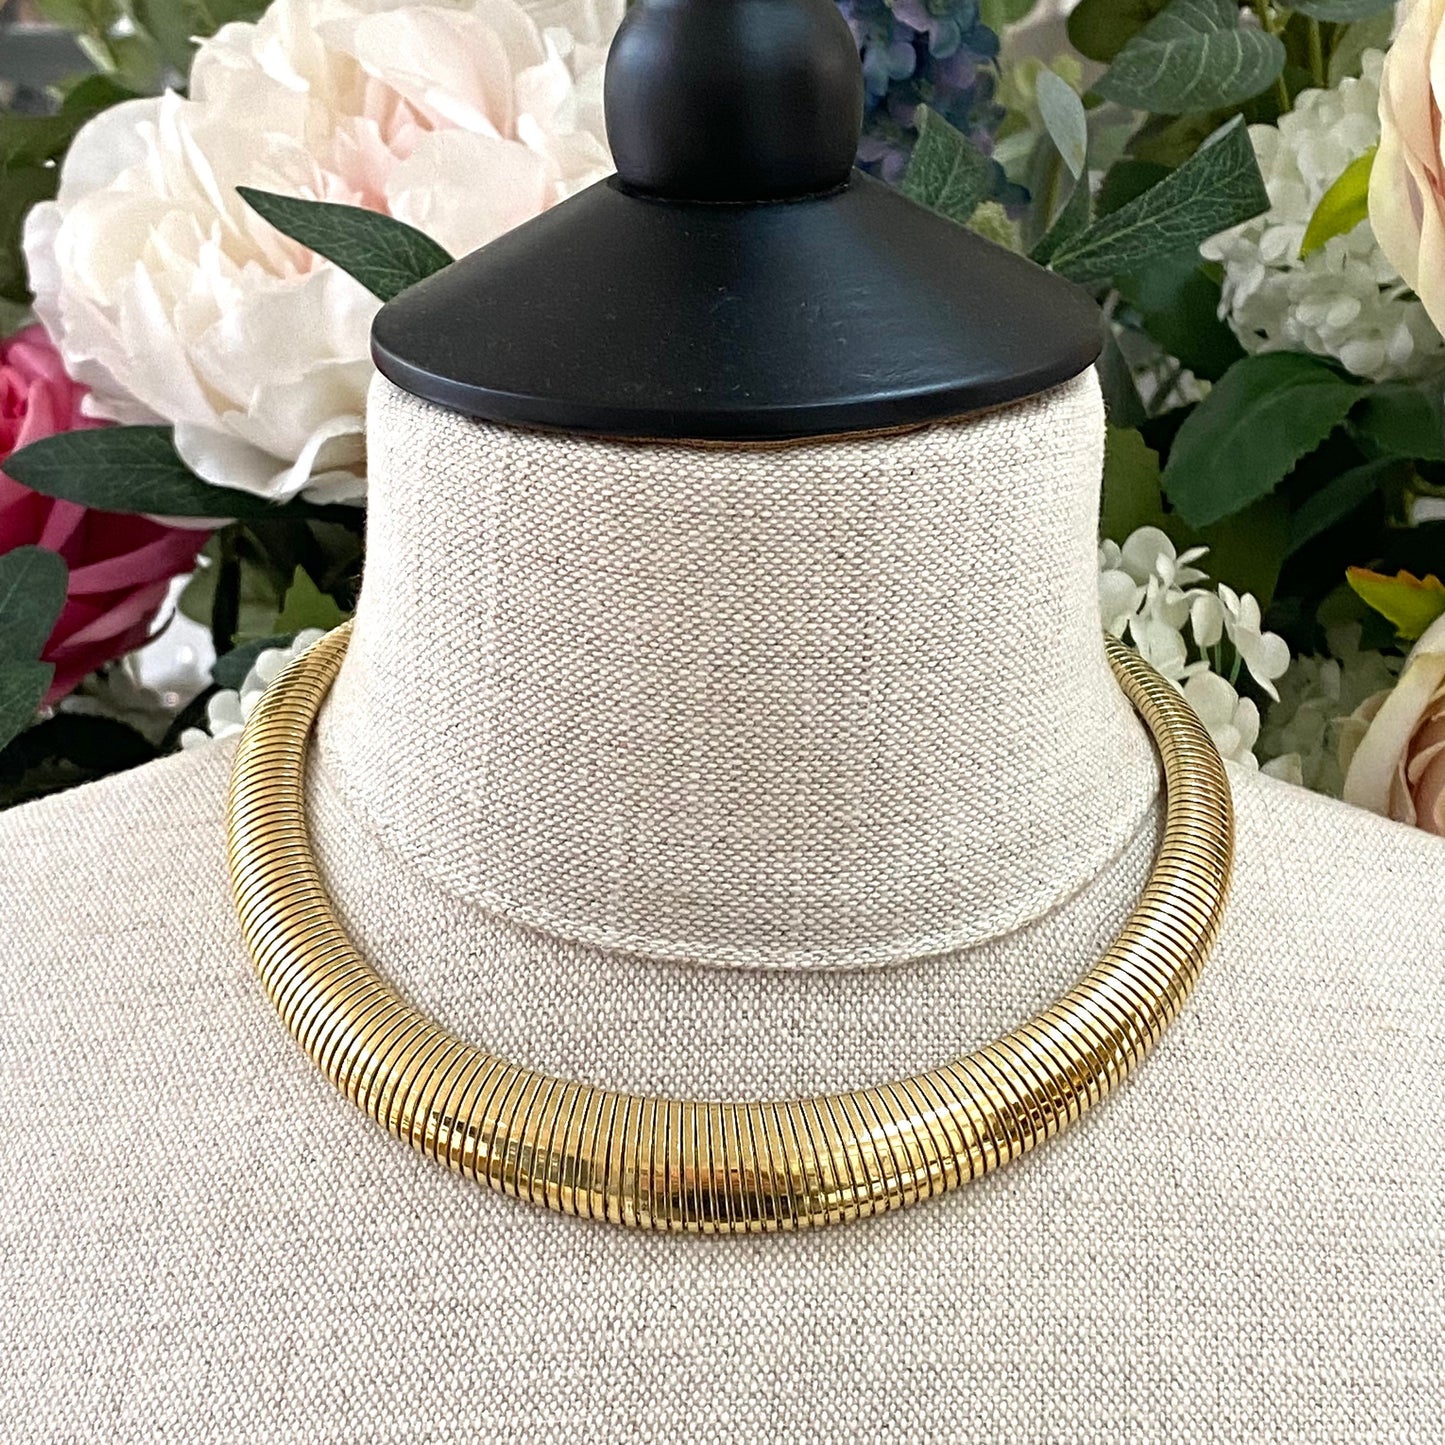 Christian Dior Gold Plated Slim/Small Omega Flexi Choker with Extender